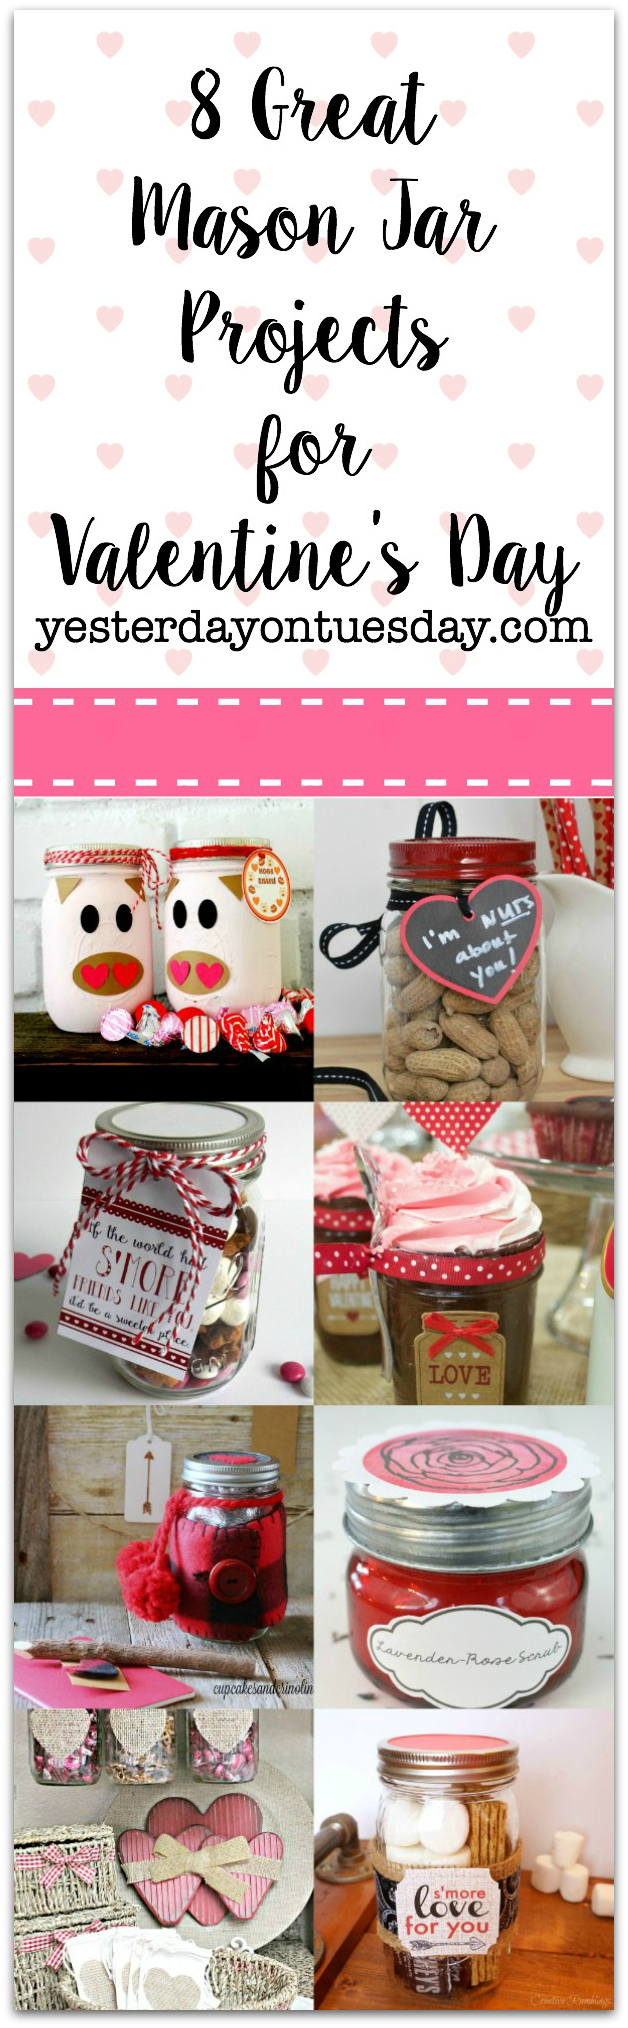 8 Great Mason Jar Projects for Valentine’s Day